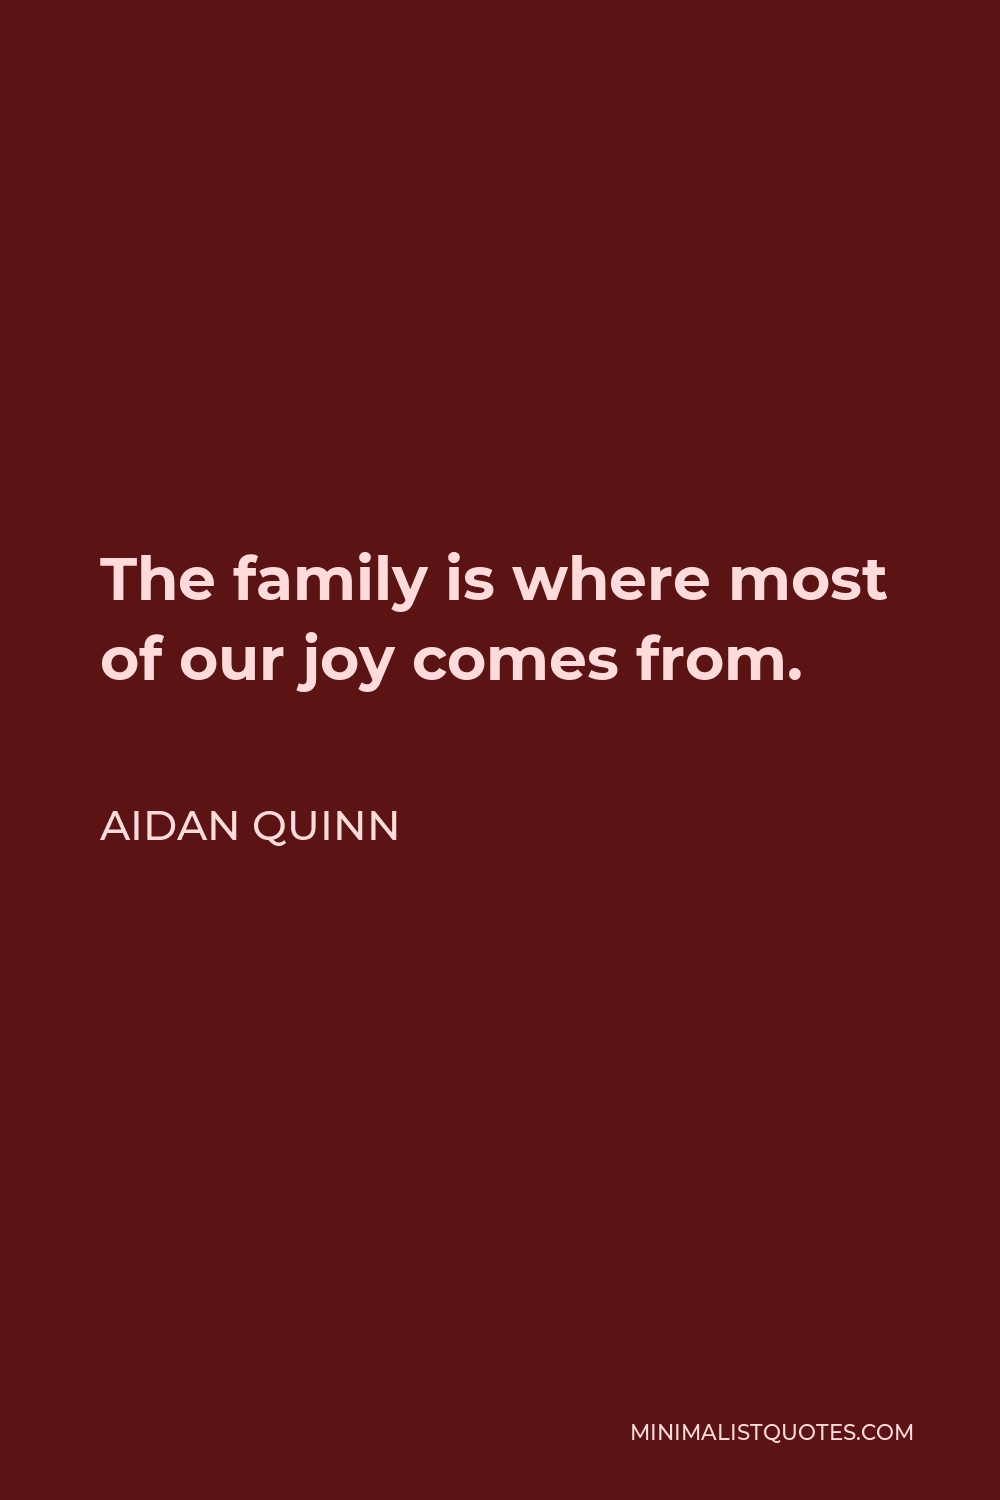 Aidan Quinn Quote - The family is where most of our joy comes from.